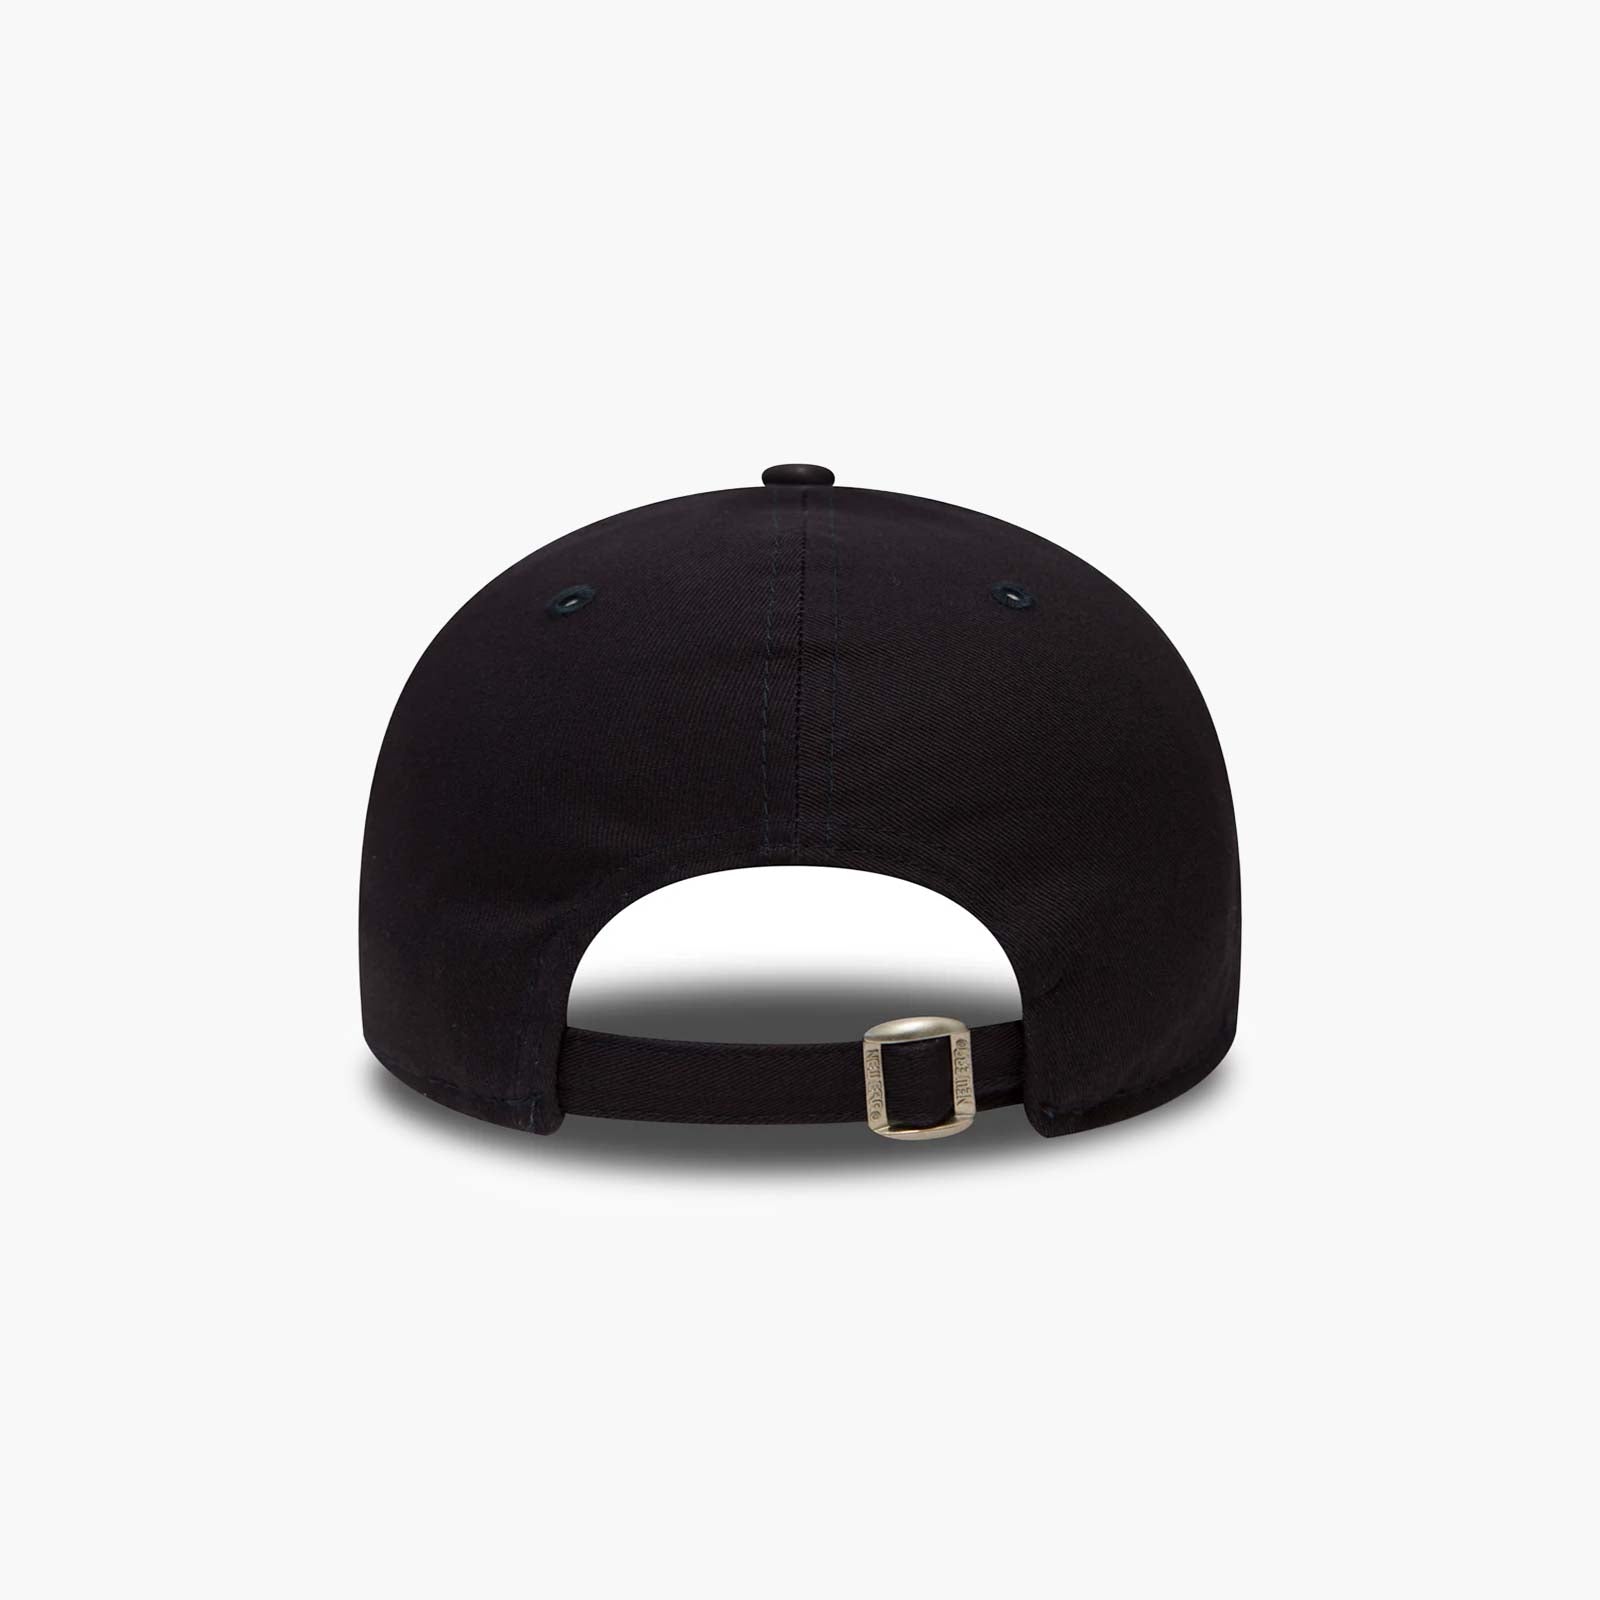 New Era 940 SUEDE – Basic In sale NeyYan Leag - Store now